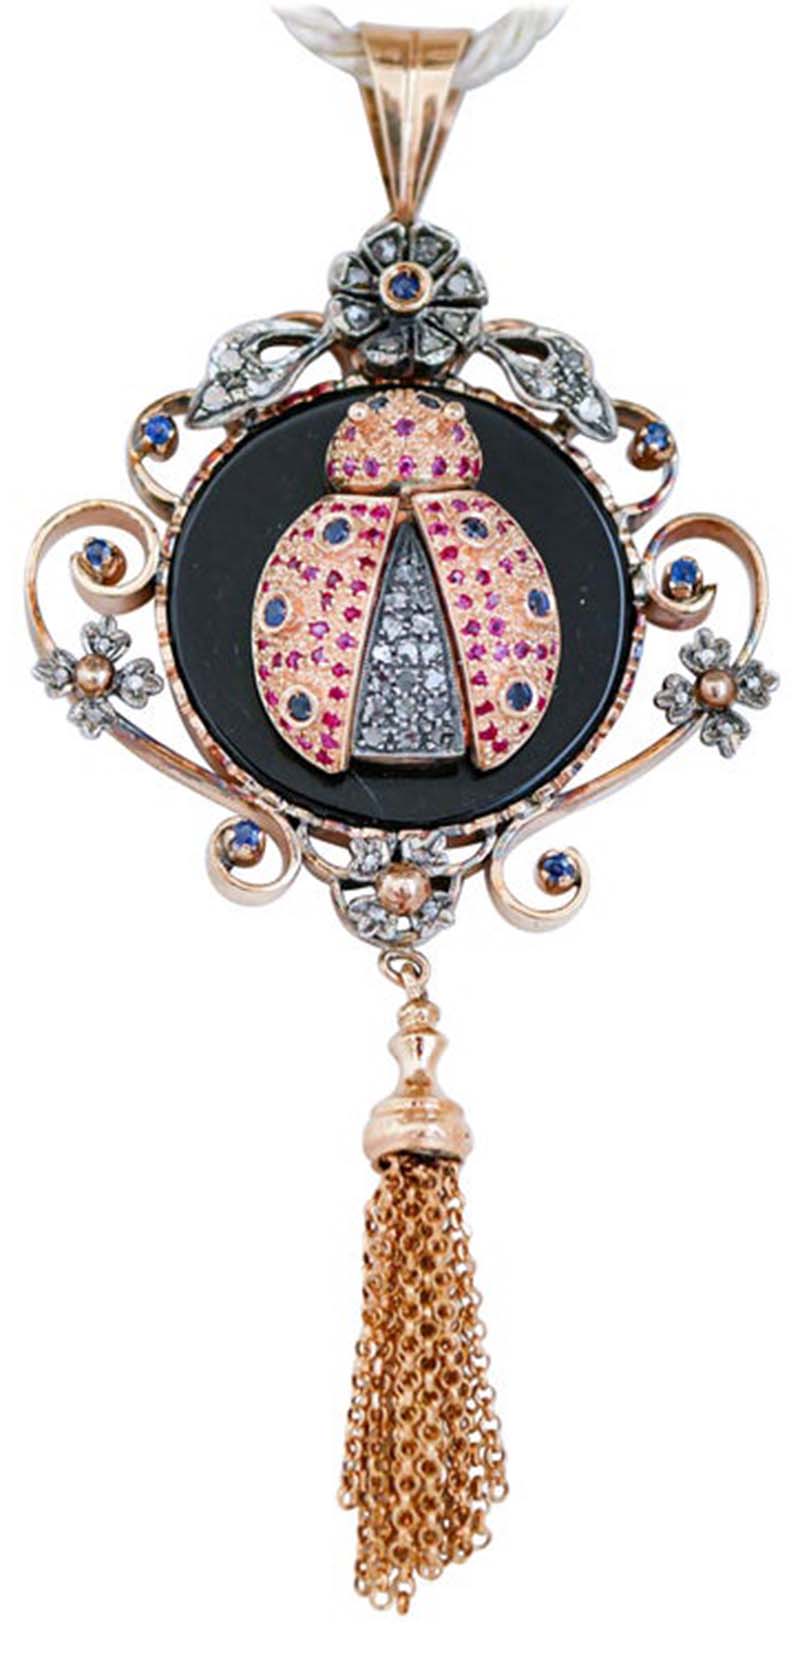 Onyx, Rubies, Sapphires, Diamonds, 14 Karat  Gold and Silver Pendant Necklace. For Sale